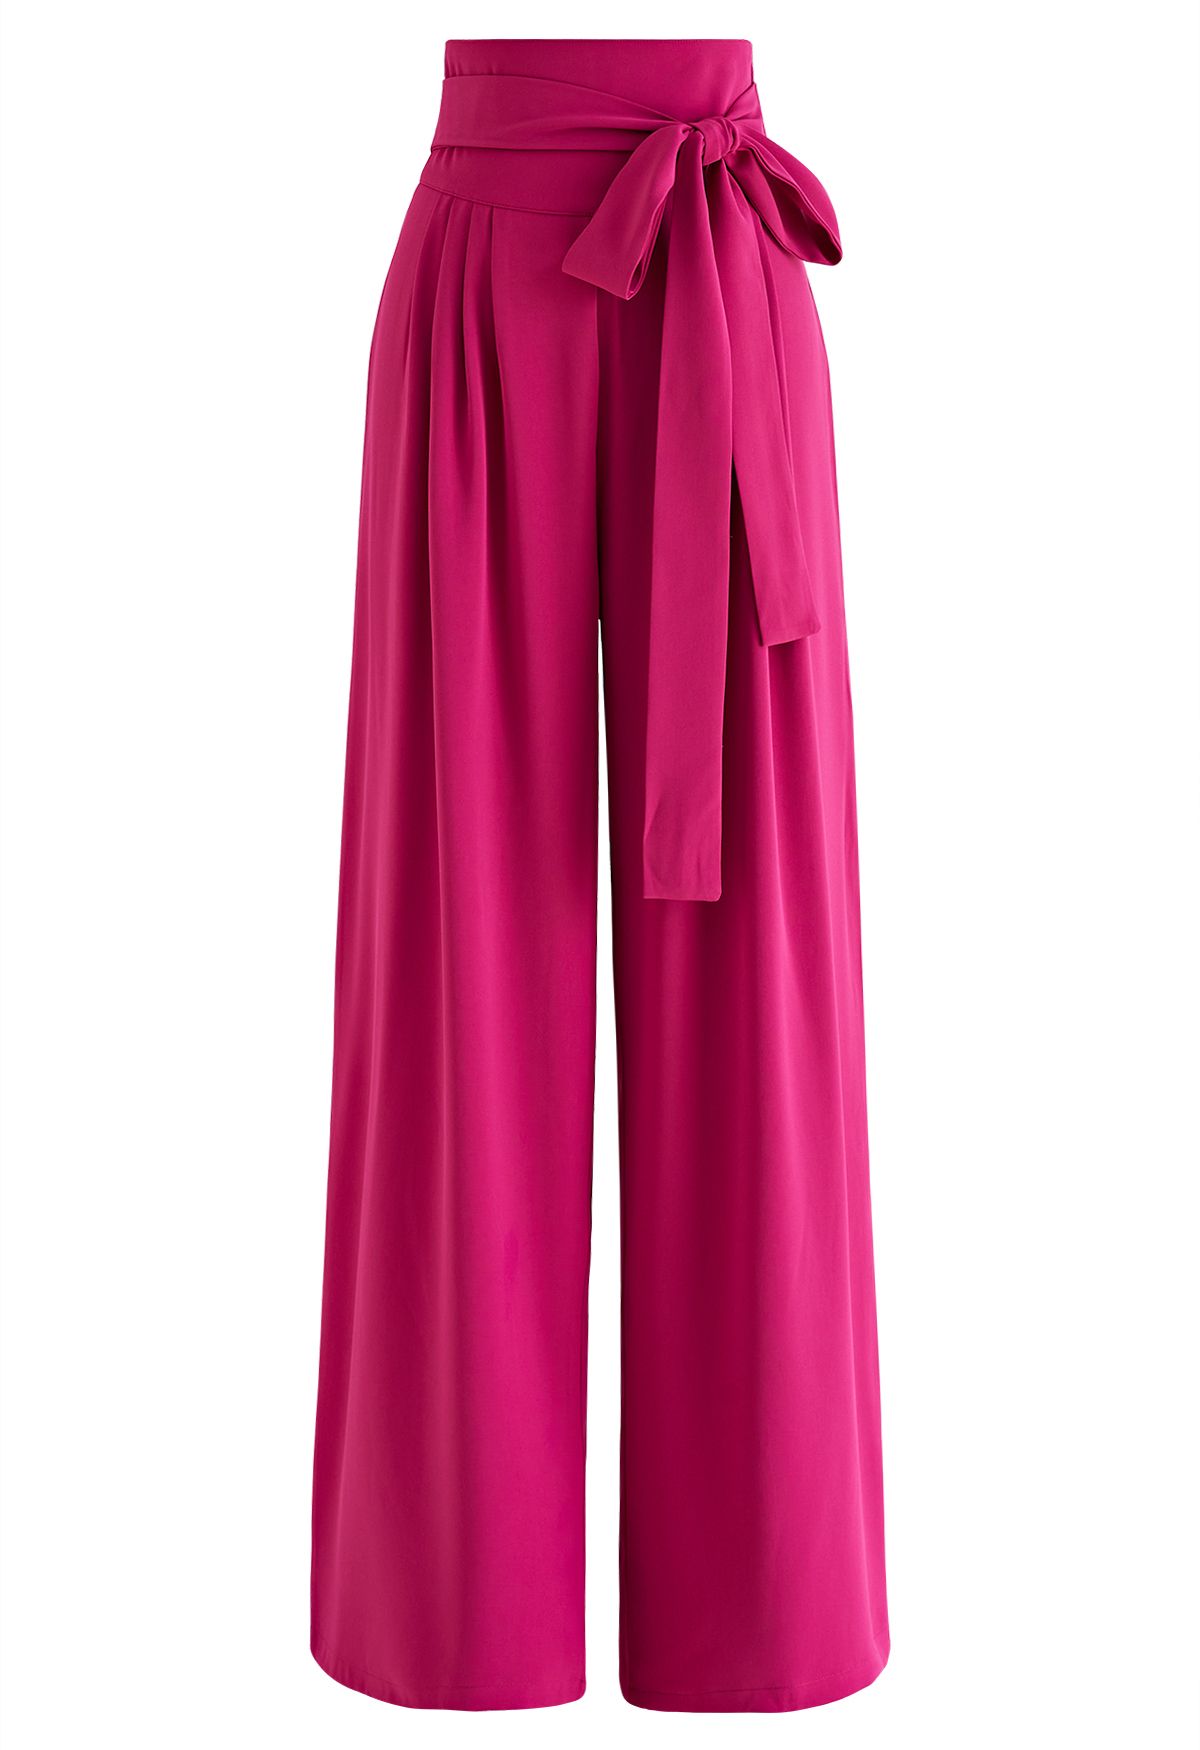 Bowknot High Waist Wide-Leg Pants in Magenta - Retro, Indie and Unique ...